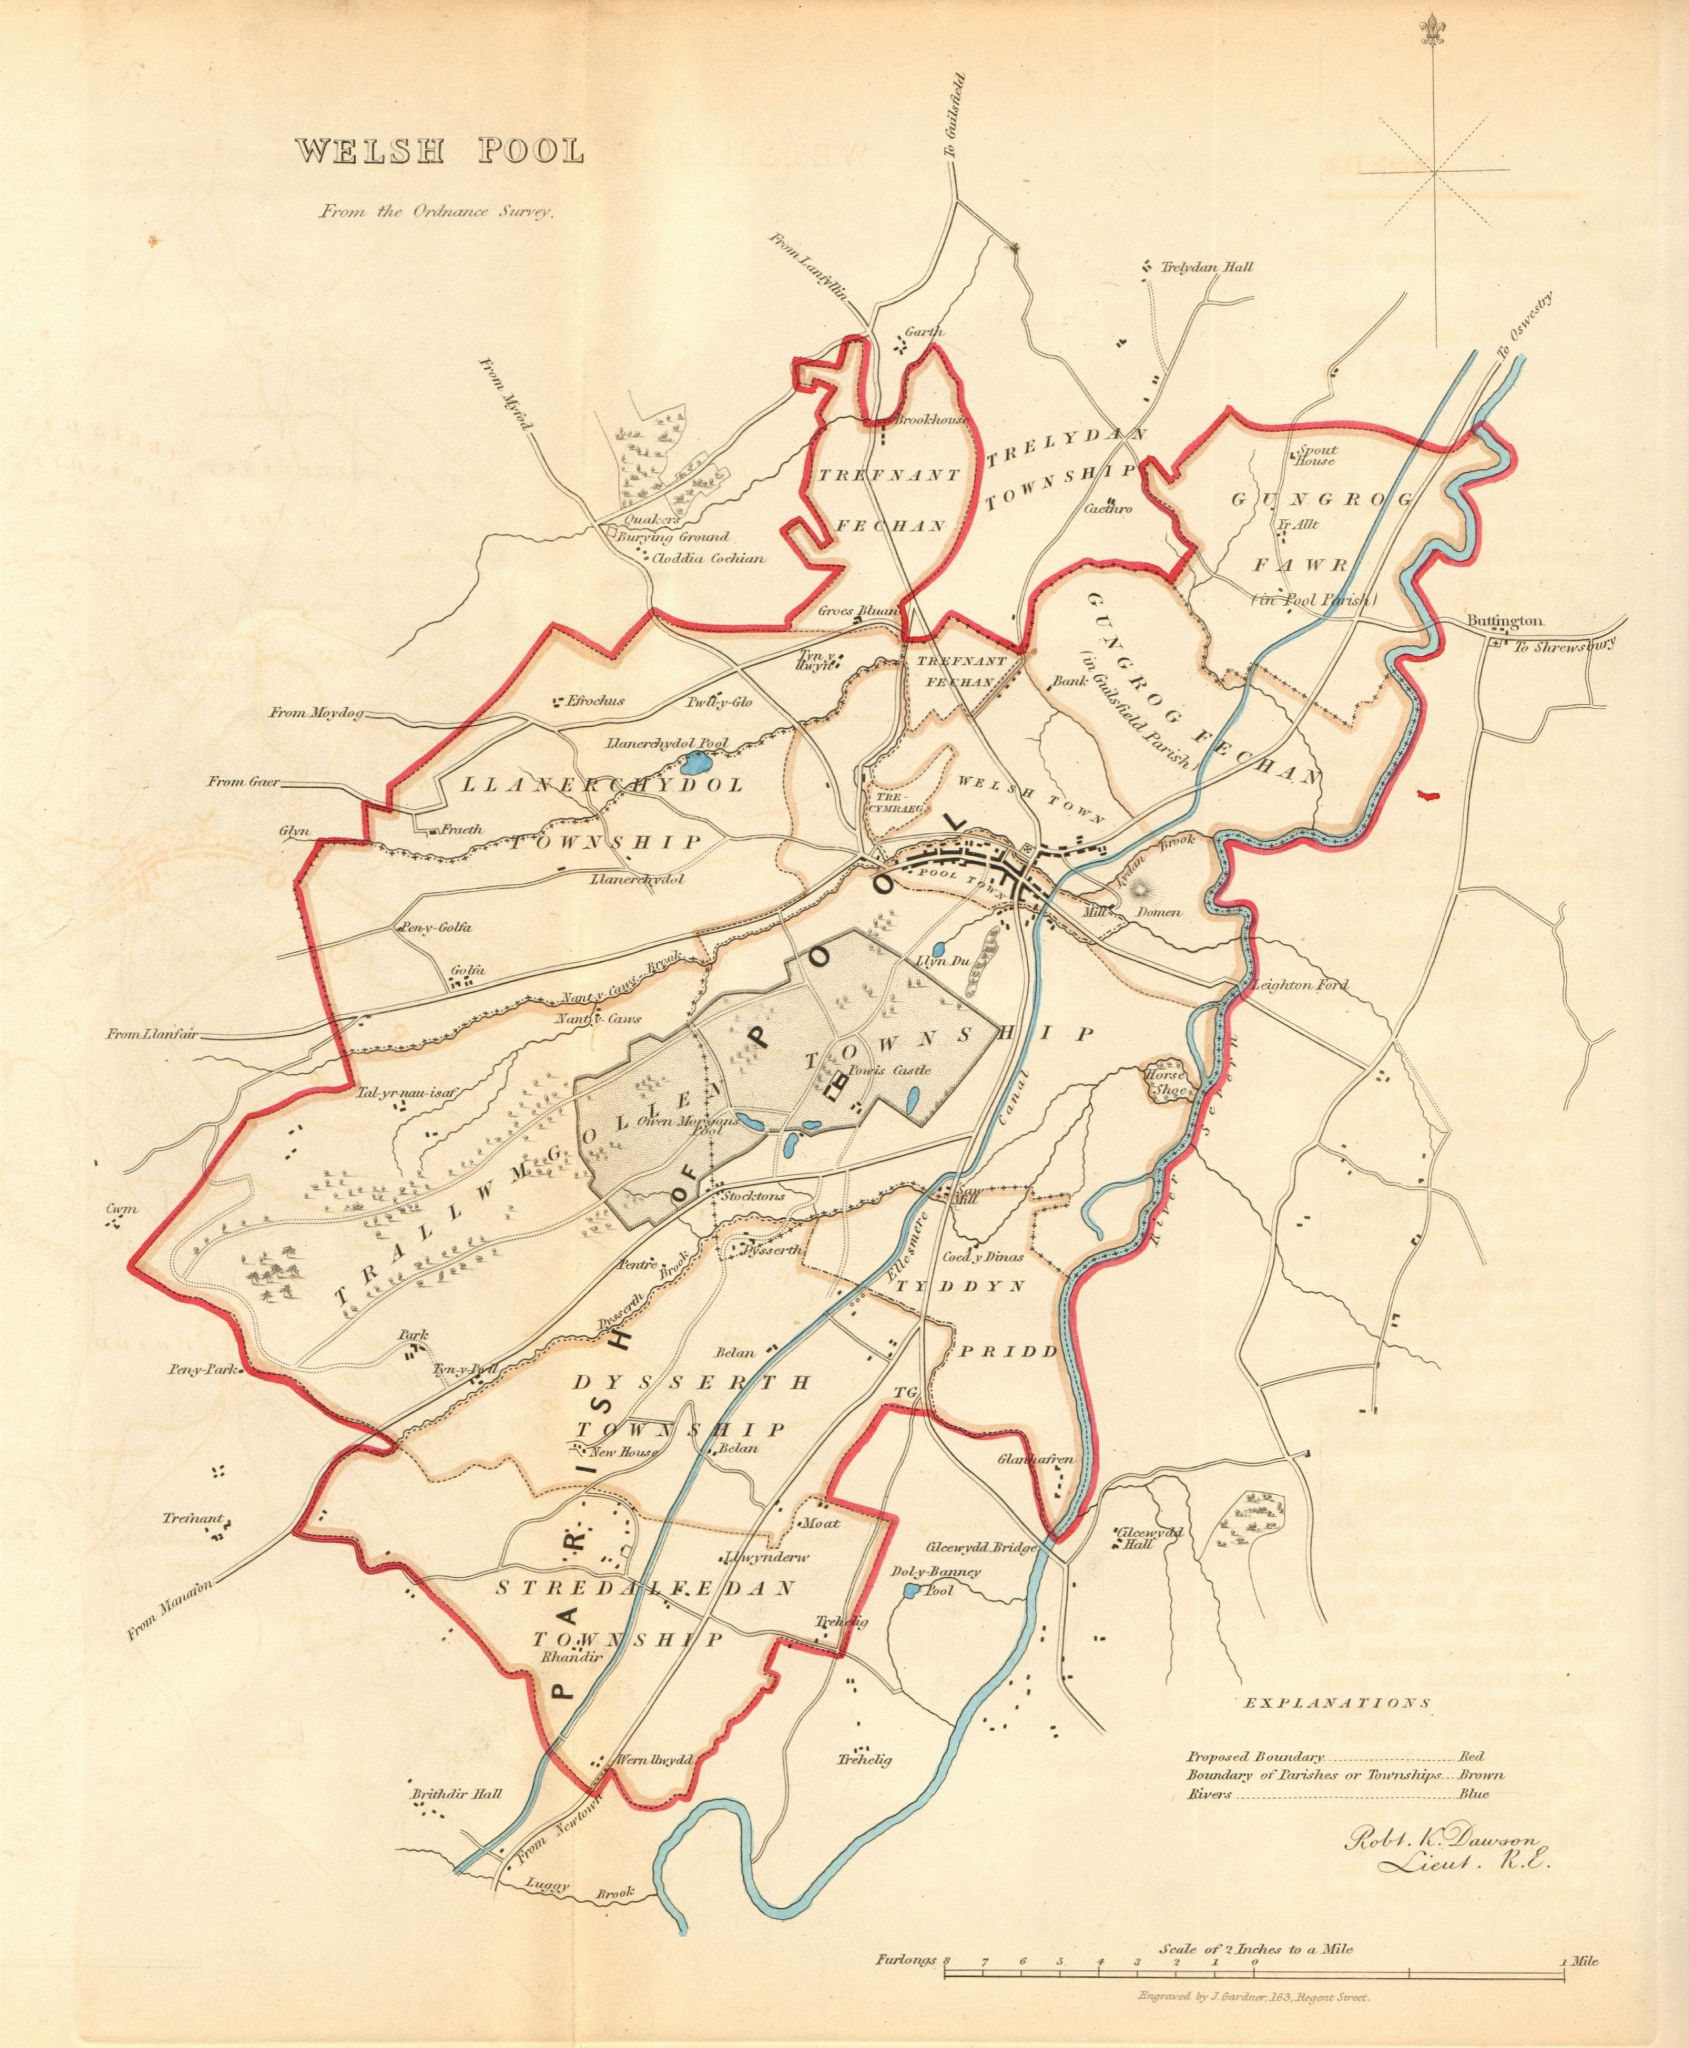 Associate Product WELSHPOOL/Y TRALLWNG borough/town plan. REFORM ACT. Wales. DAWSON 1832 old map